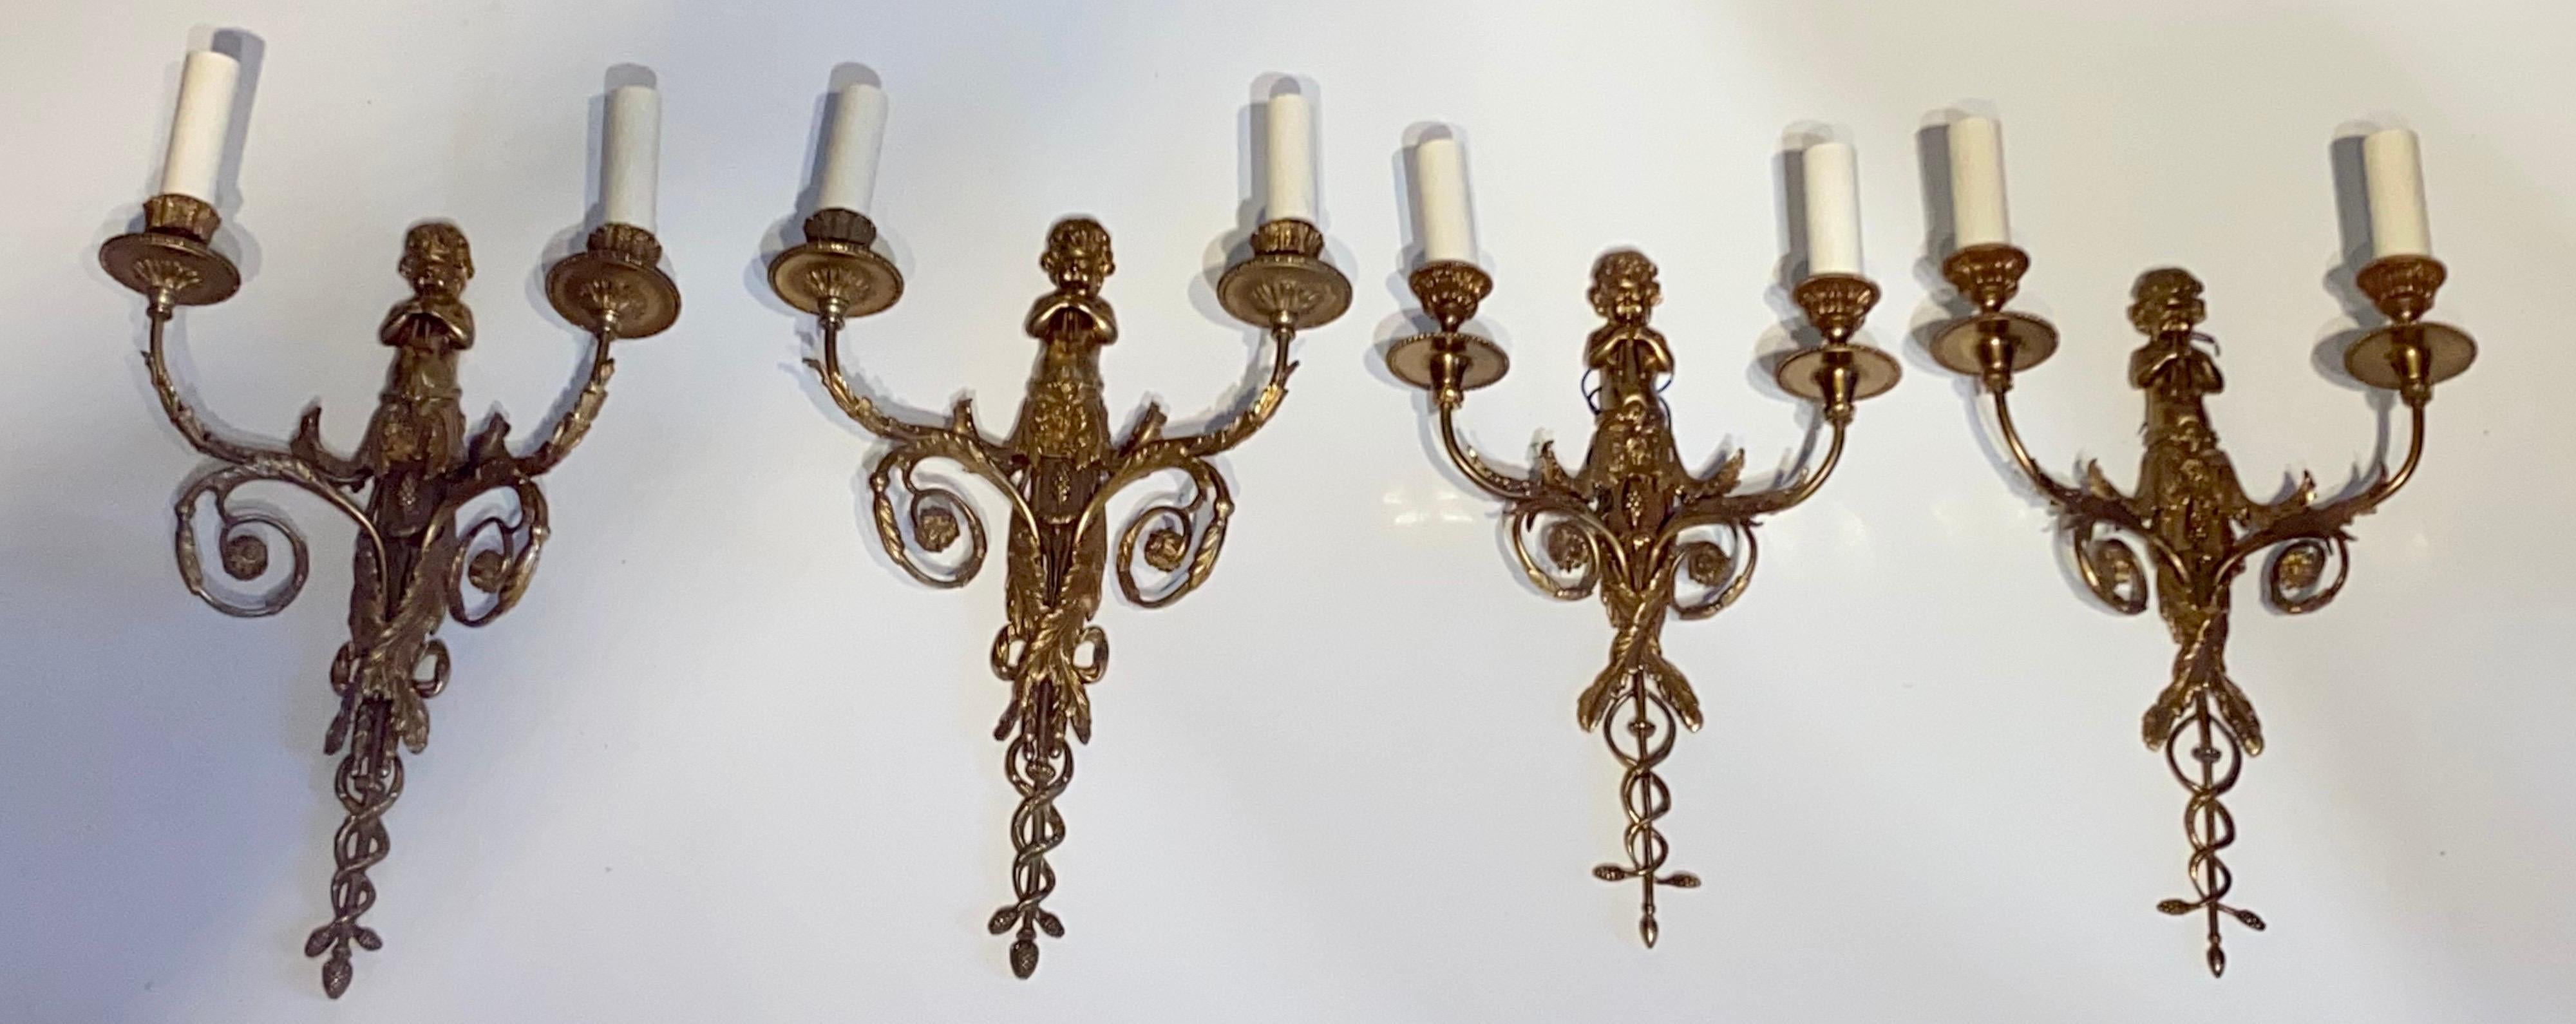 Set of Four French Gilt Bronze Dore Two Branch Cherub Wall Sconces For Sale 5